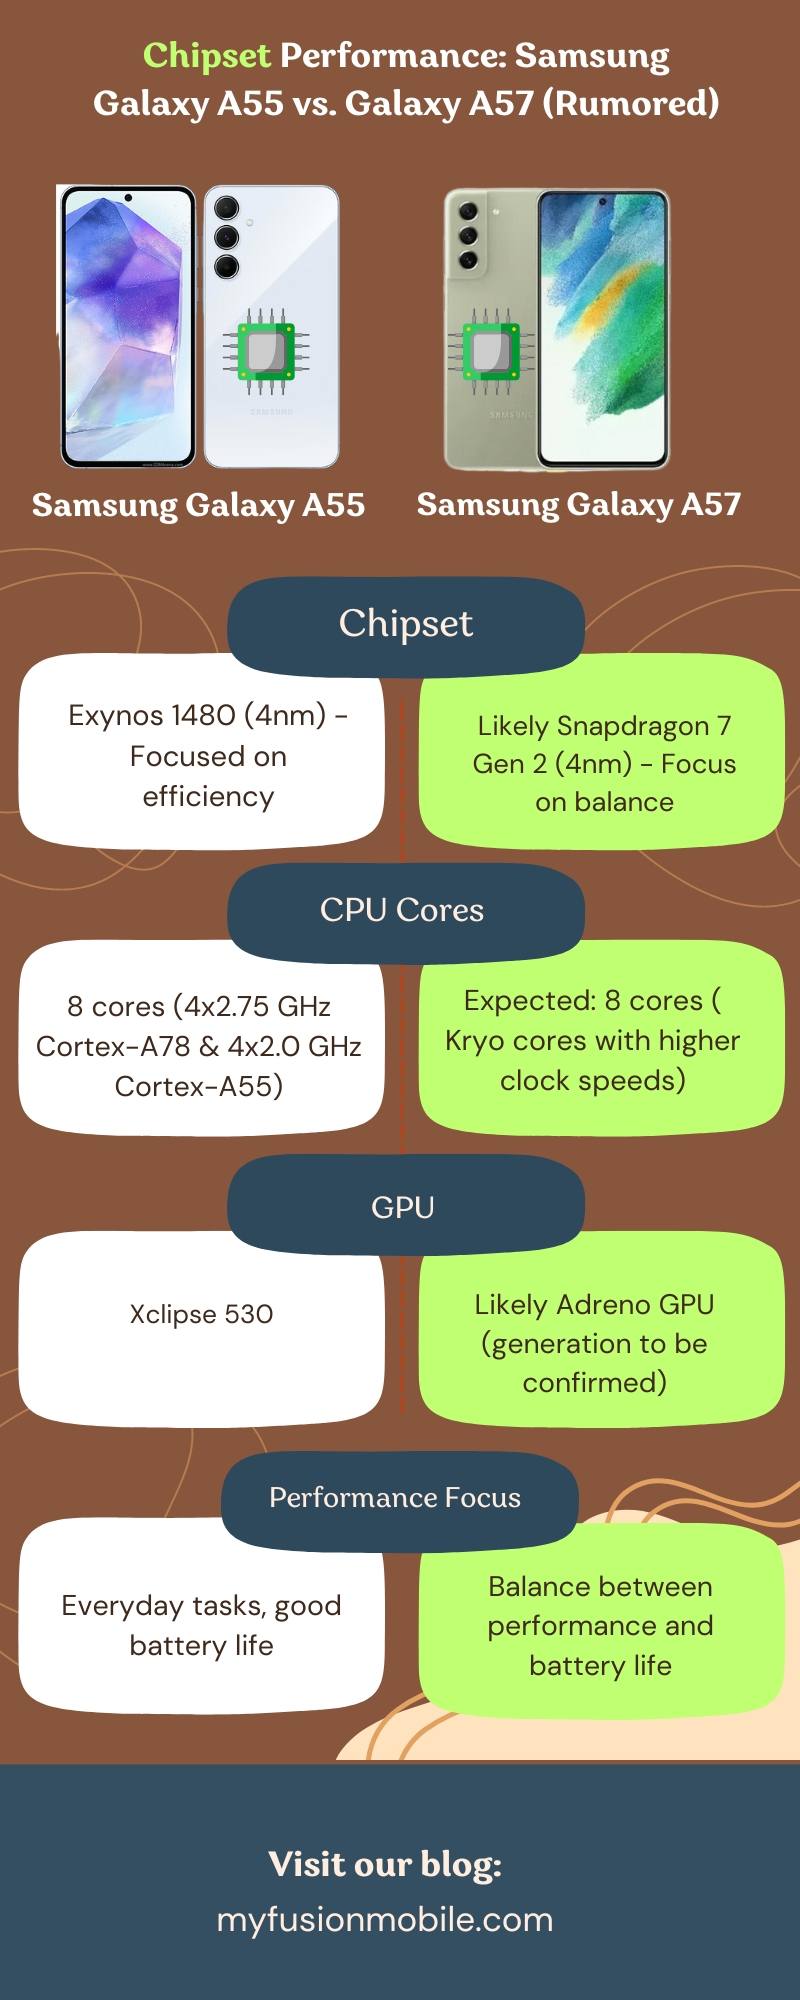 Chipset Performance: Samsung Galaxy A55 vs. Galaxy A57 (Rumored)